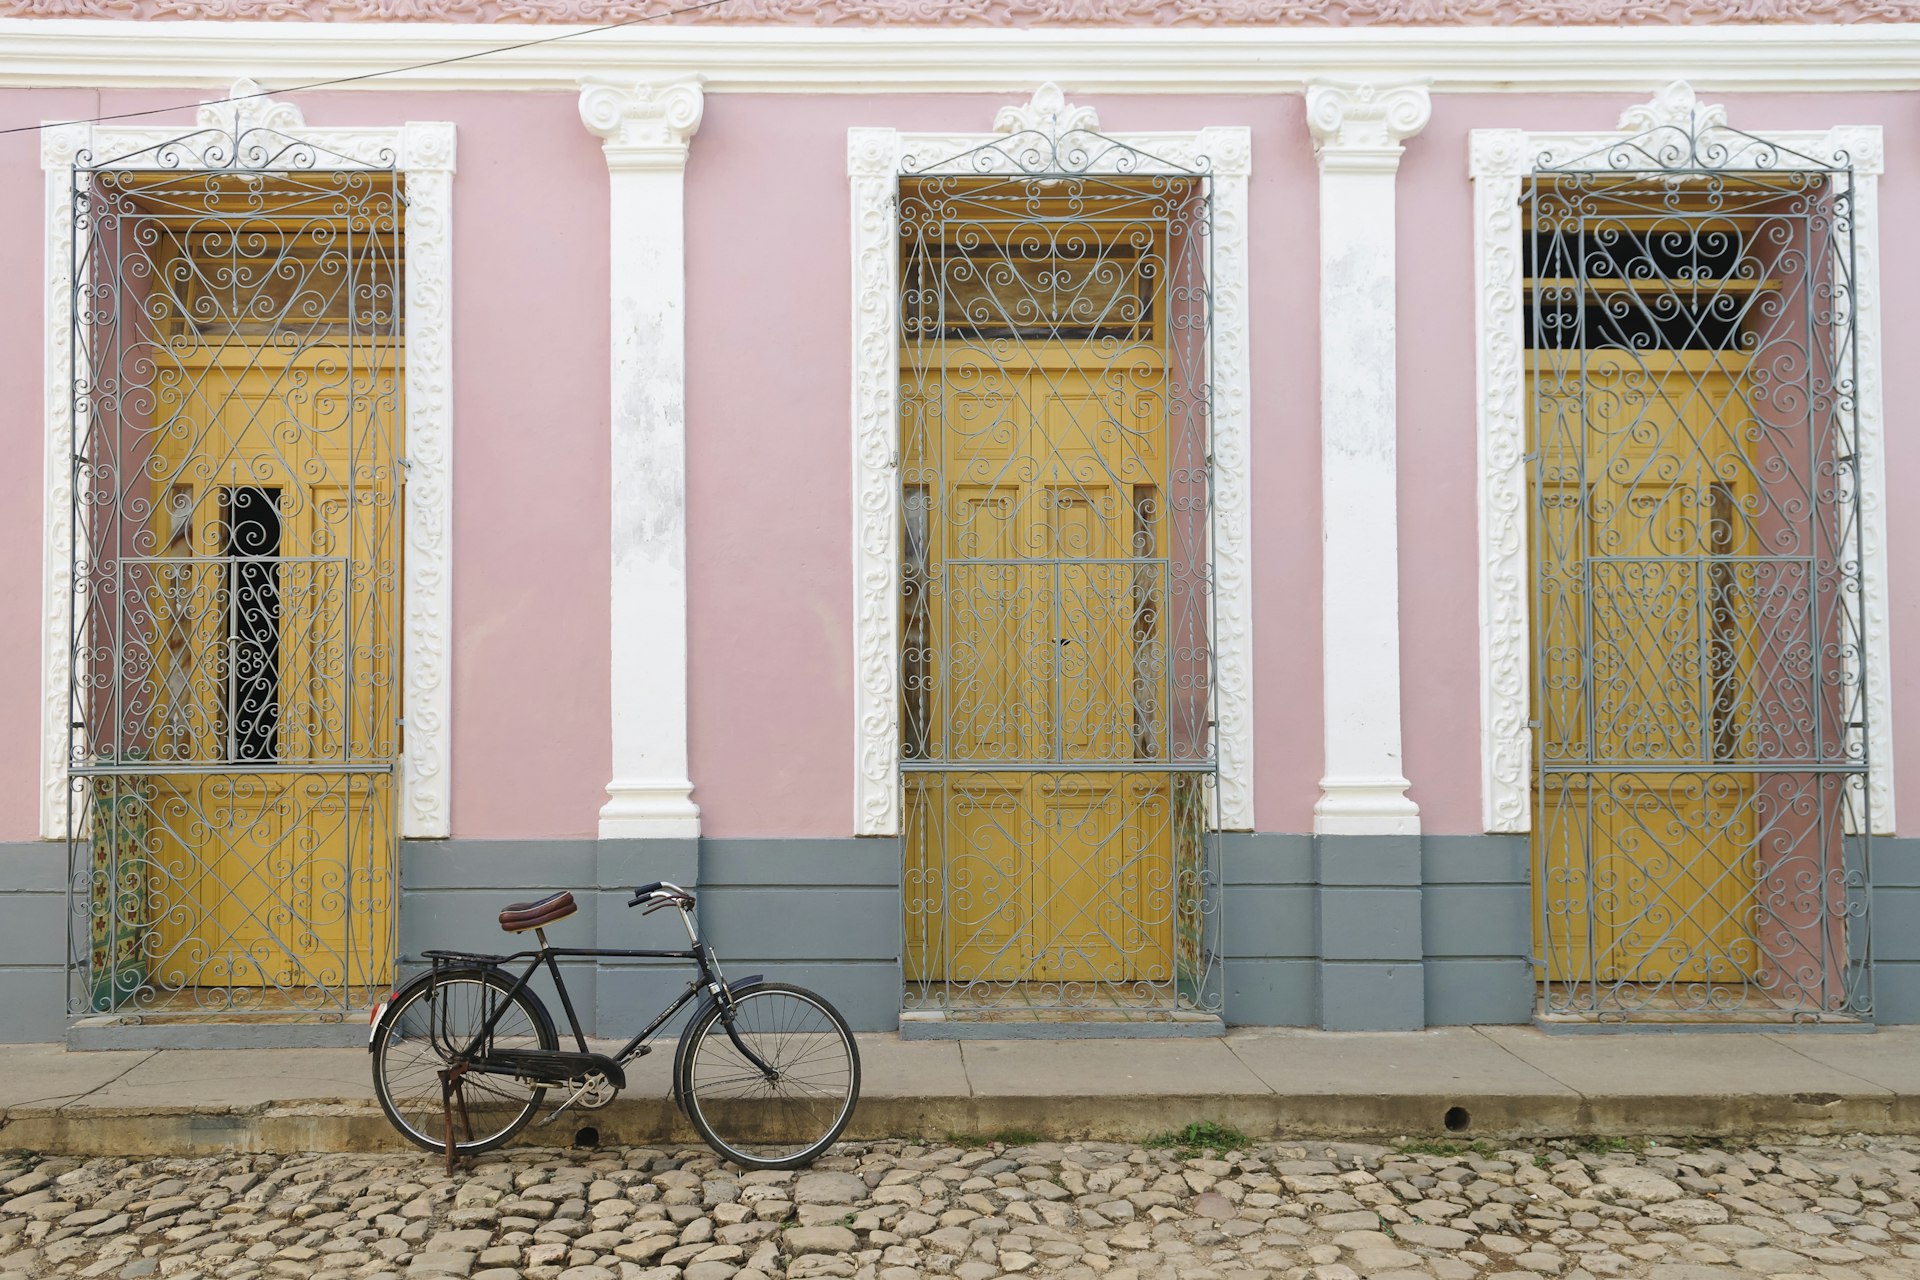 Typical pastel-colored house with wooden front doors framed by plaster motifs and wrought-iron ornamental grills, Trinidad.